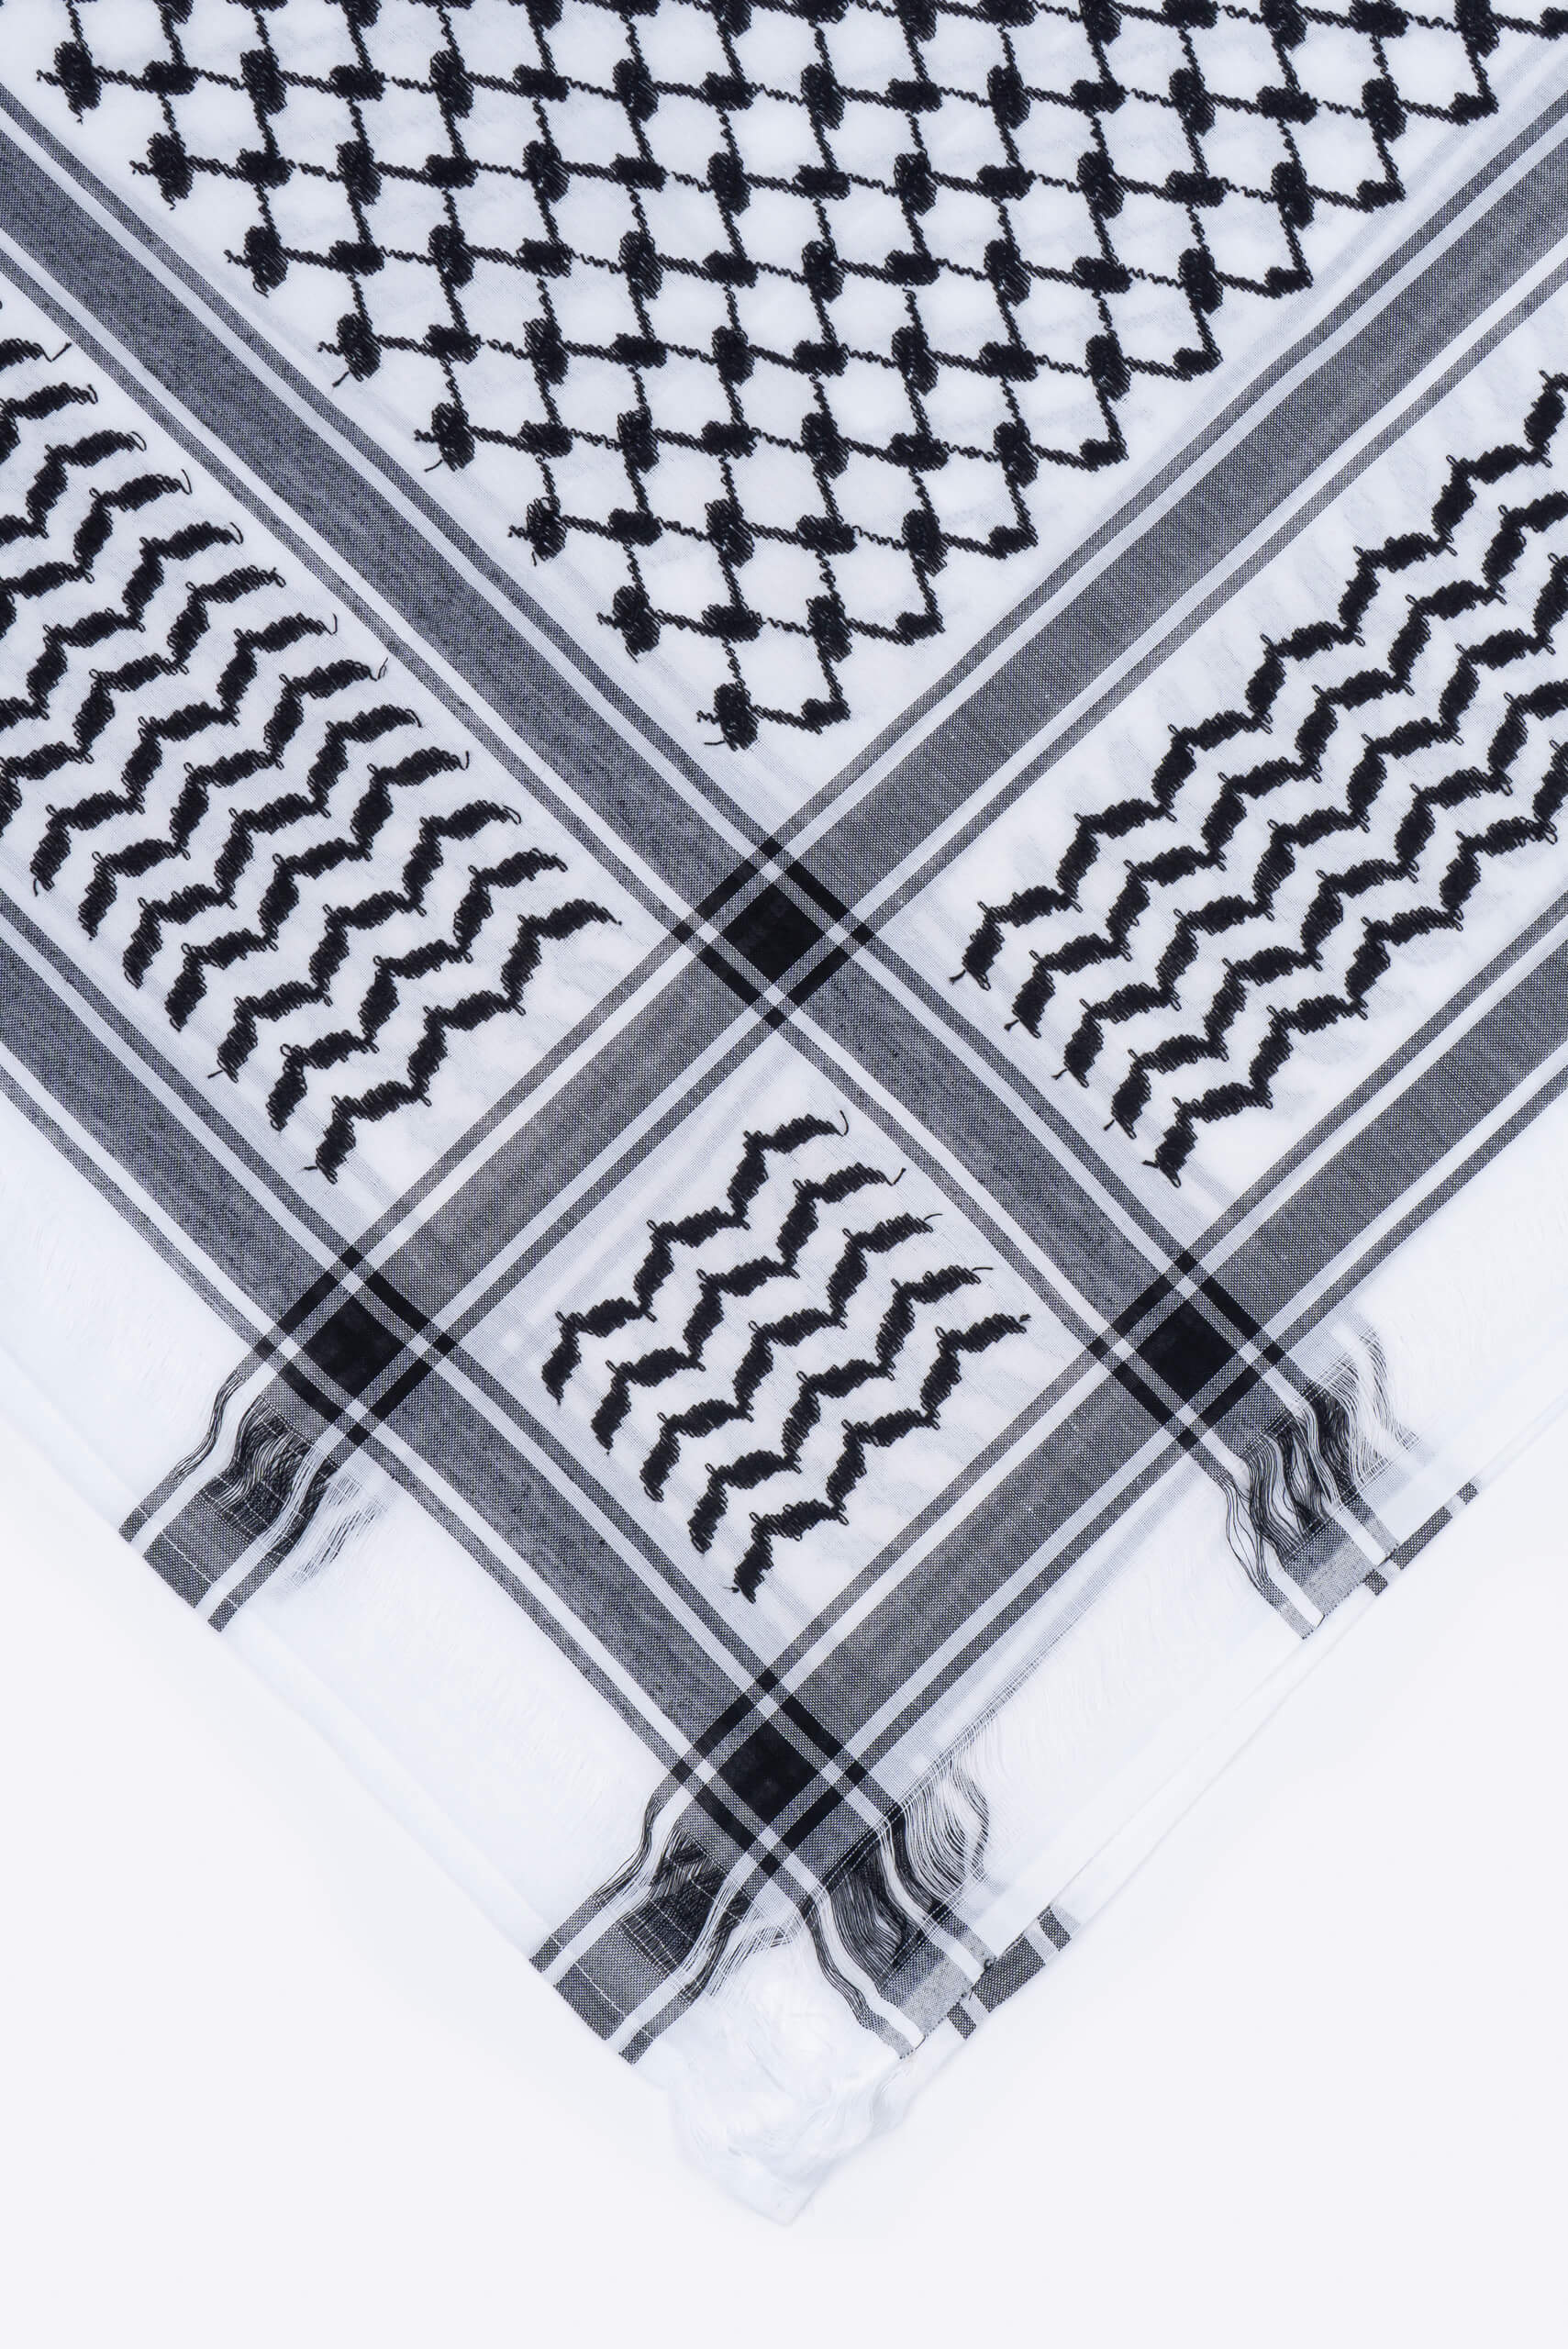 Palestinian Shemagh - Shemagh Scarf - Muslim Lifestyle Store